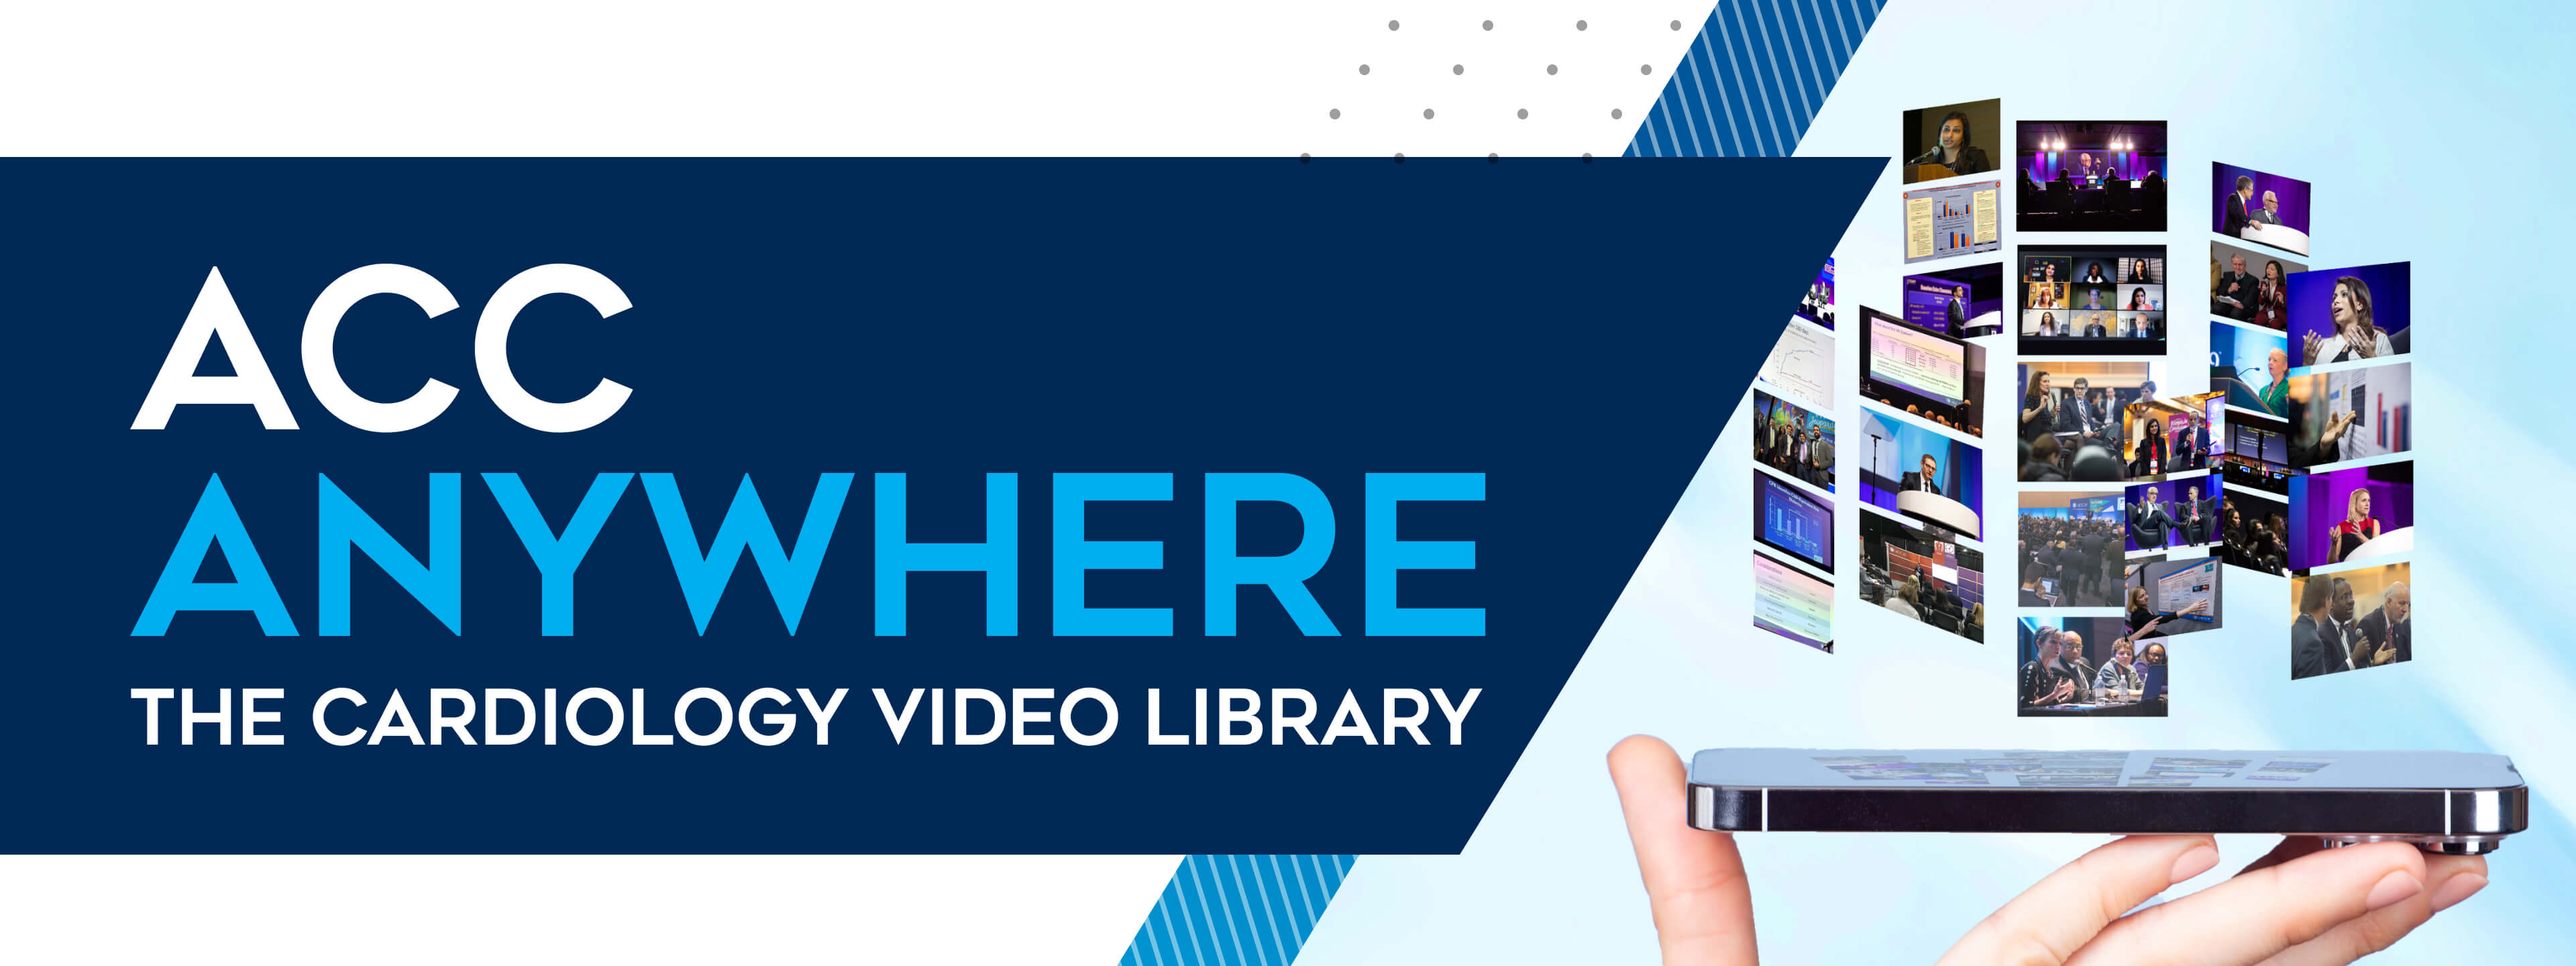 ACC Anywhere: The Cardiology Video Library